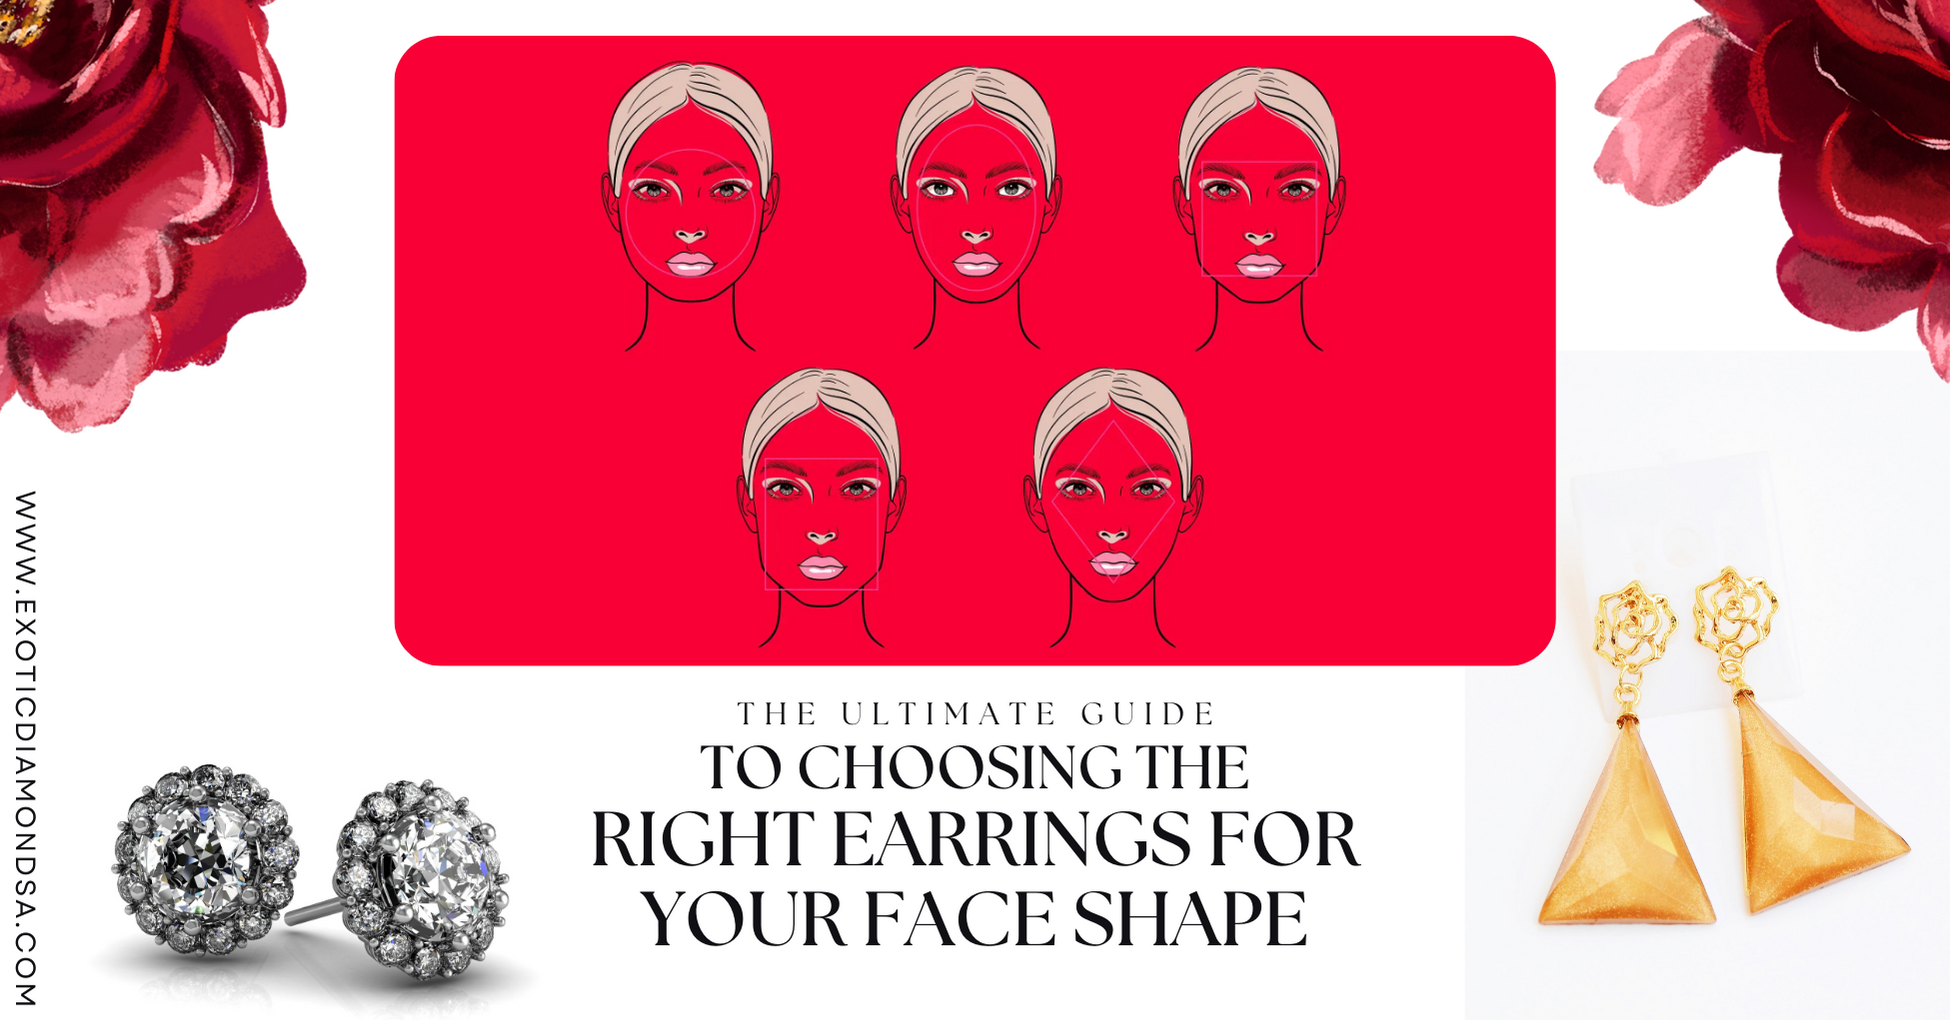 THE ULTIMATE GUIDE TO CHOOSING THE RIGHT EARRINGS FOR YOUR FACE SHAPE